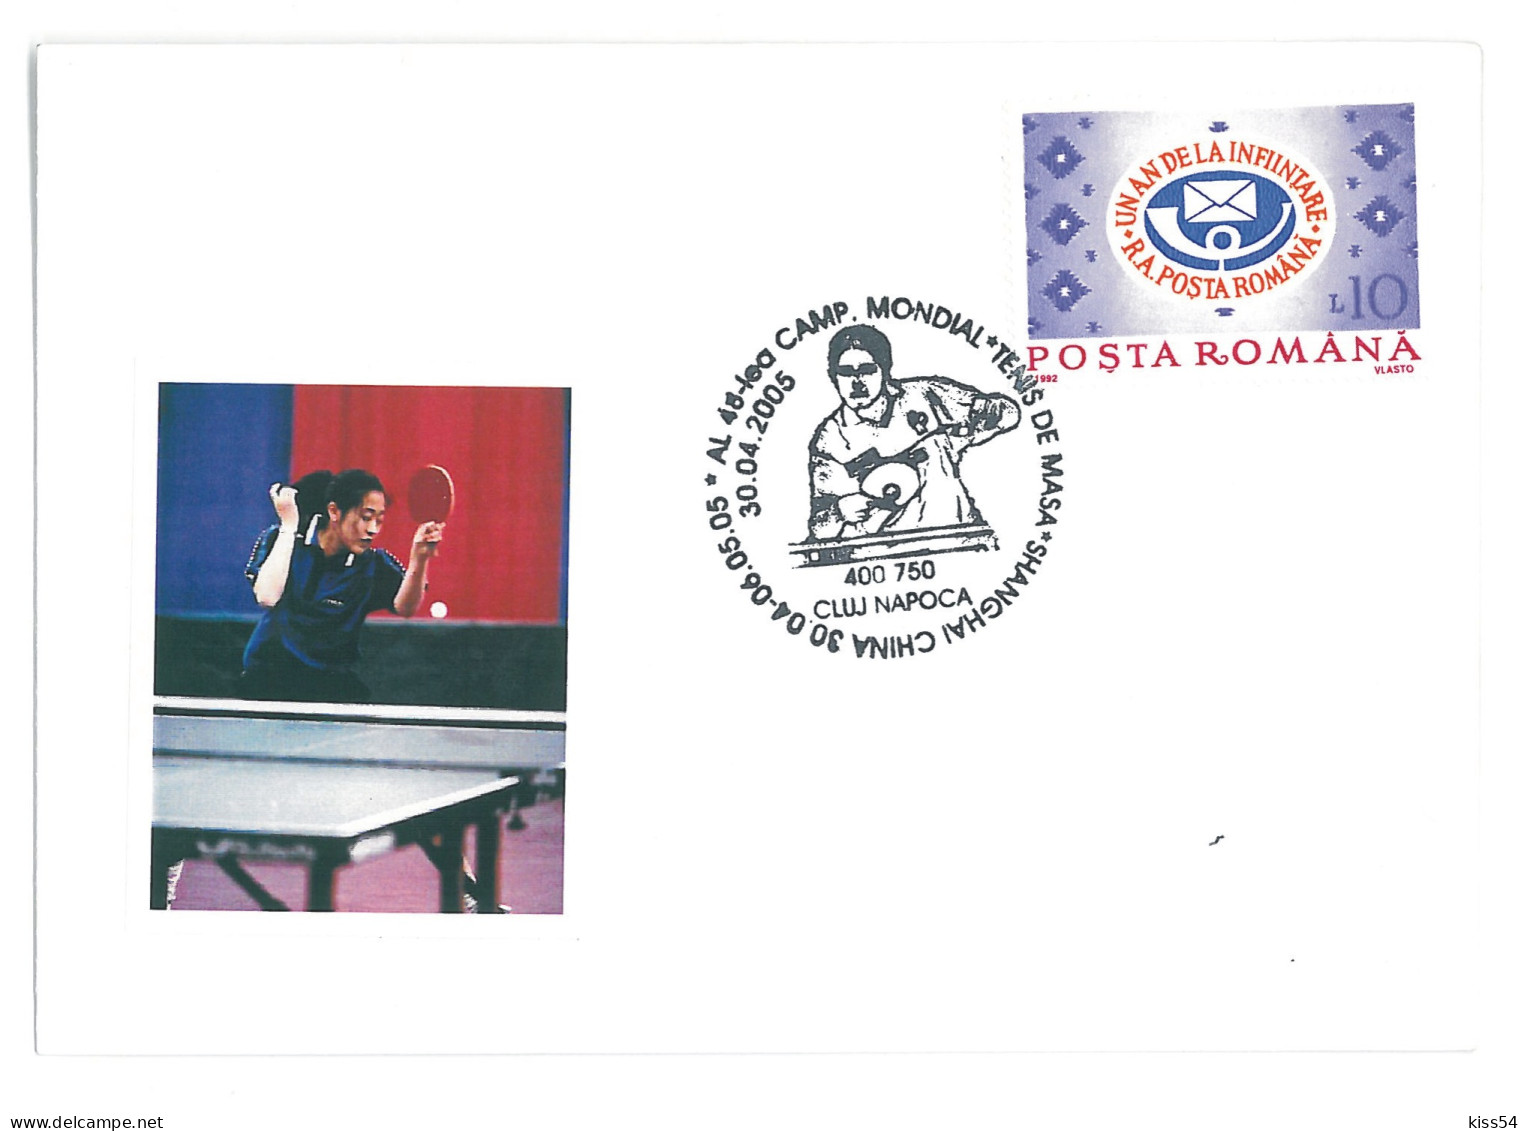 COV 95 - 902 CHINA World Table Tennis Championship SHANGHAI, Romania - Cover - Used - 2005 - Covers & Documents